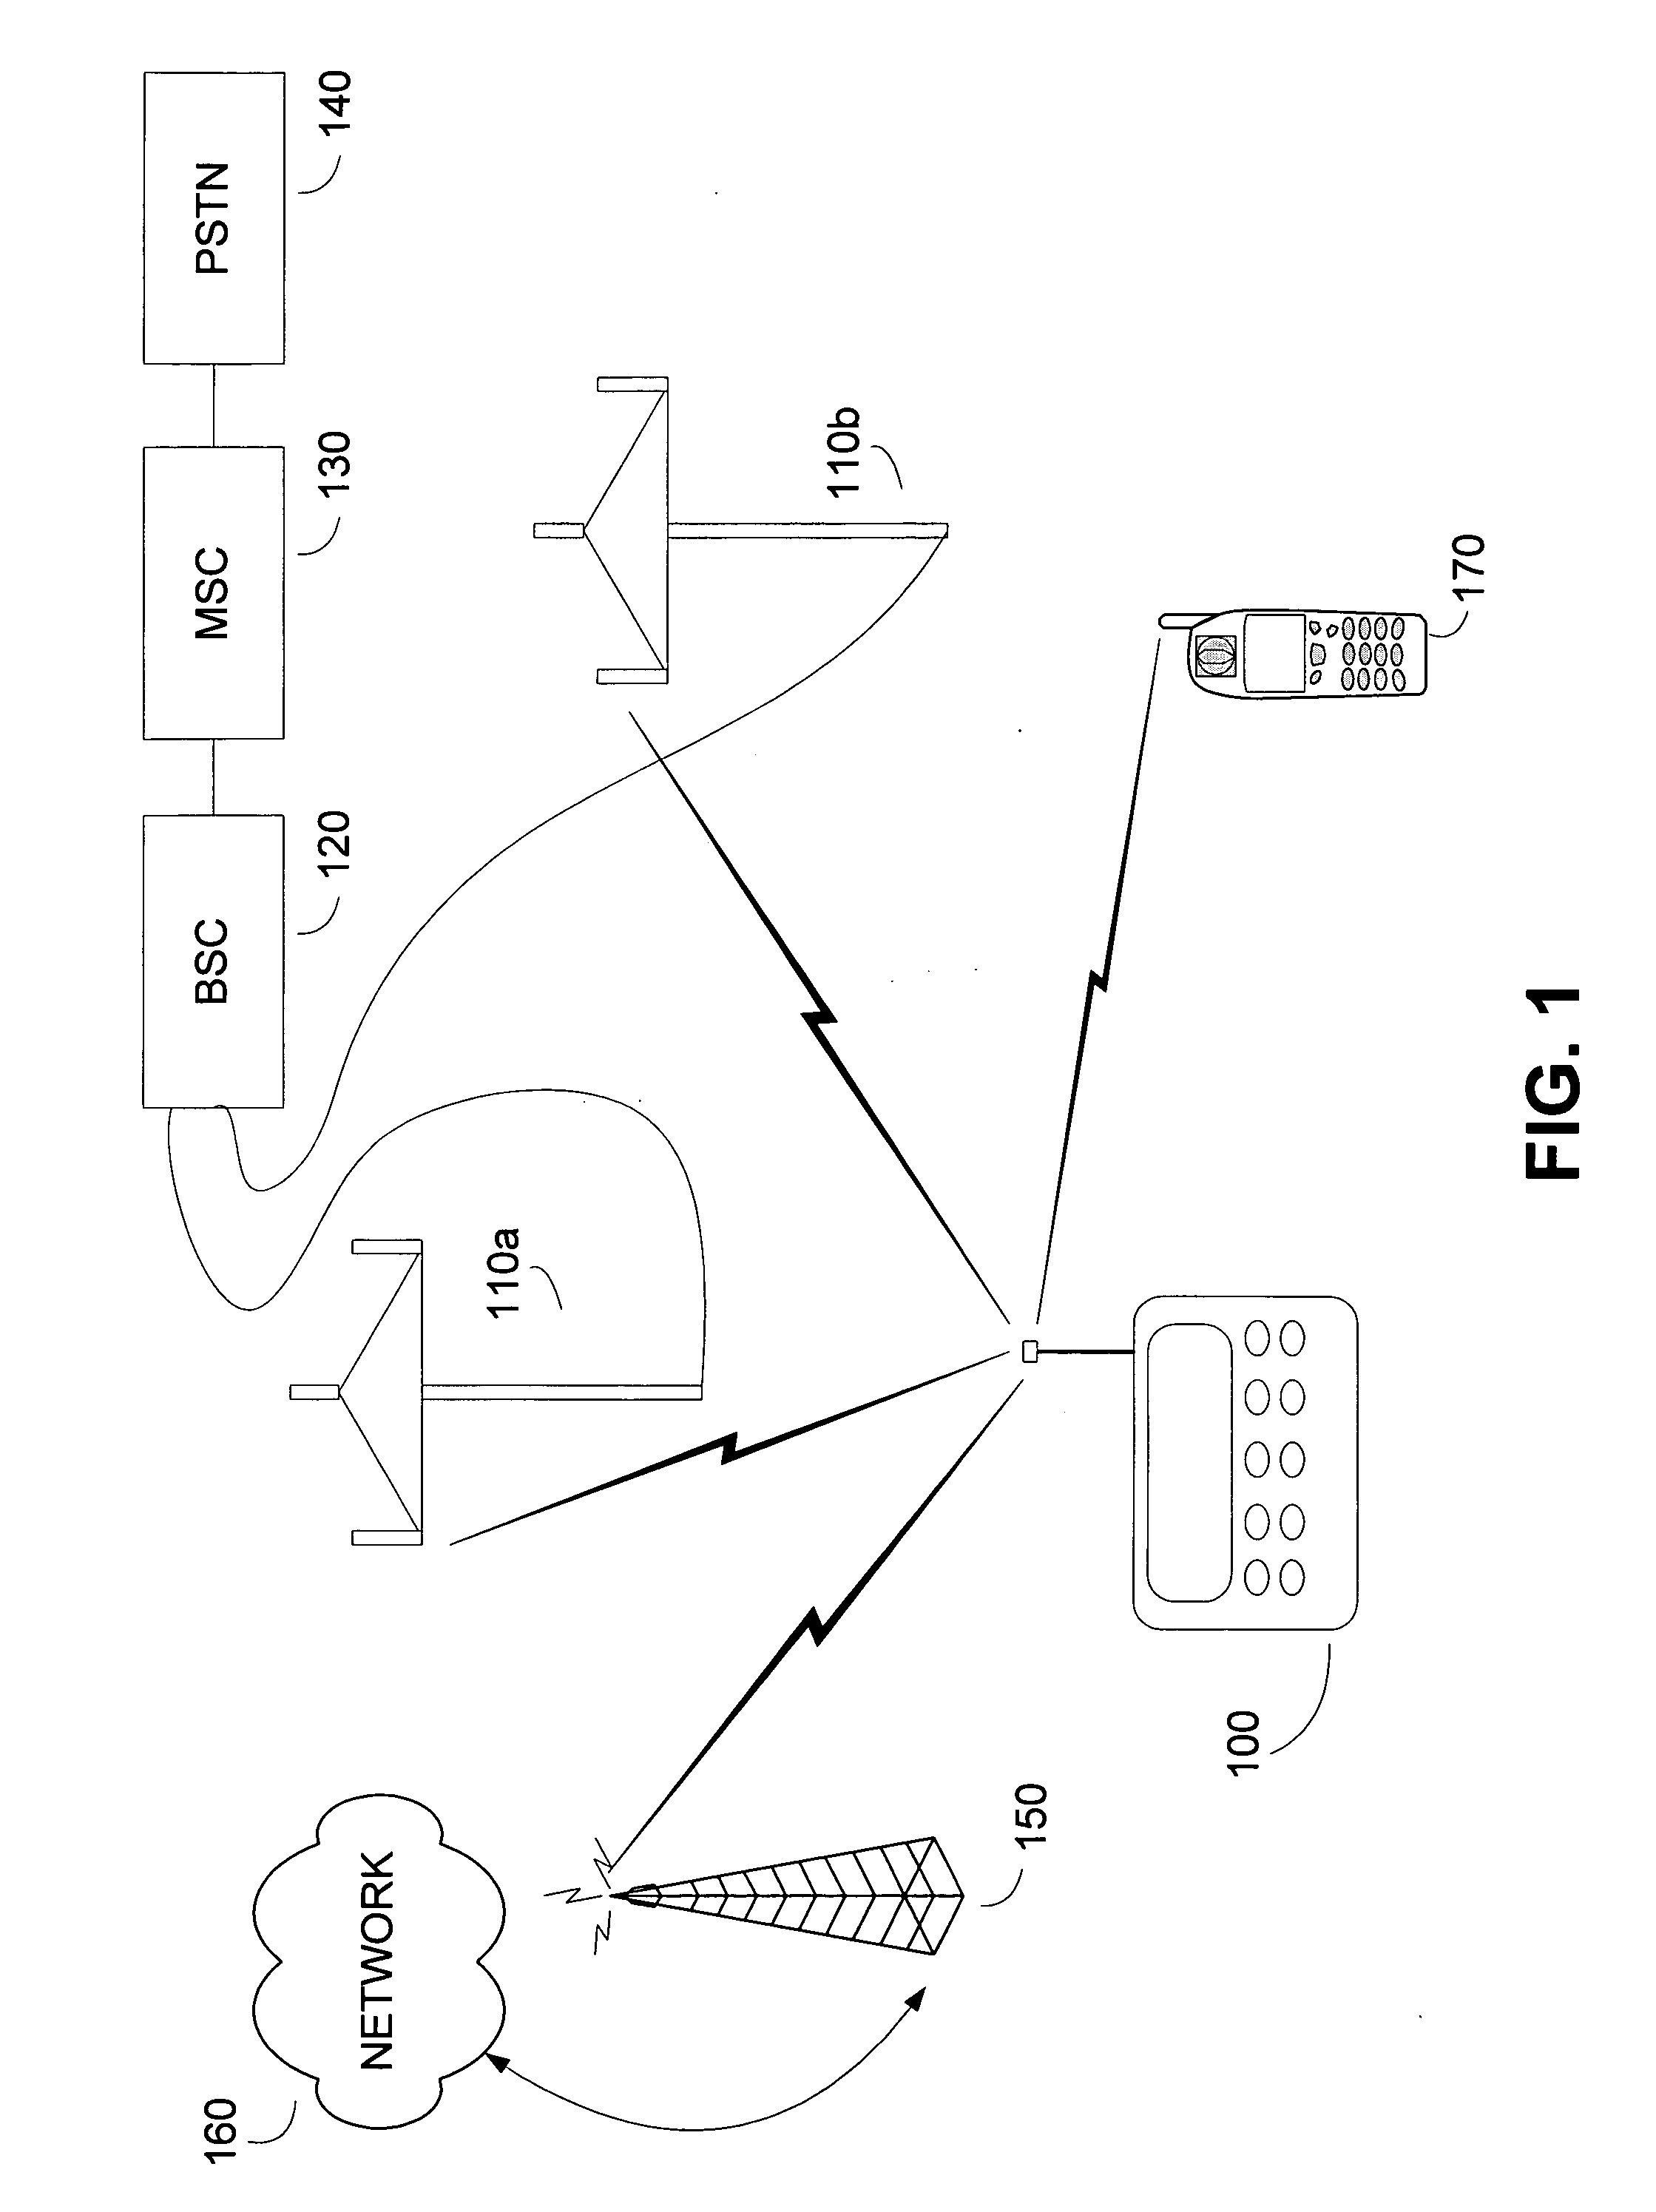 Transmitter and receiver architecture for multi-mode wireless device